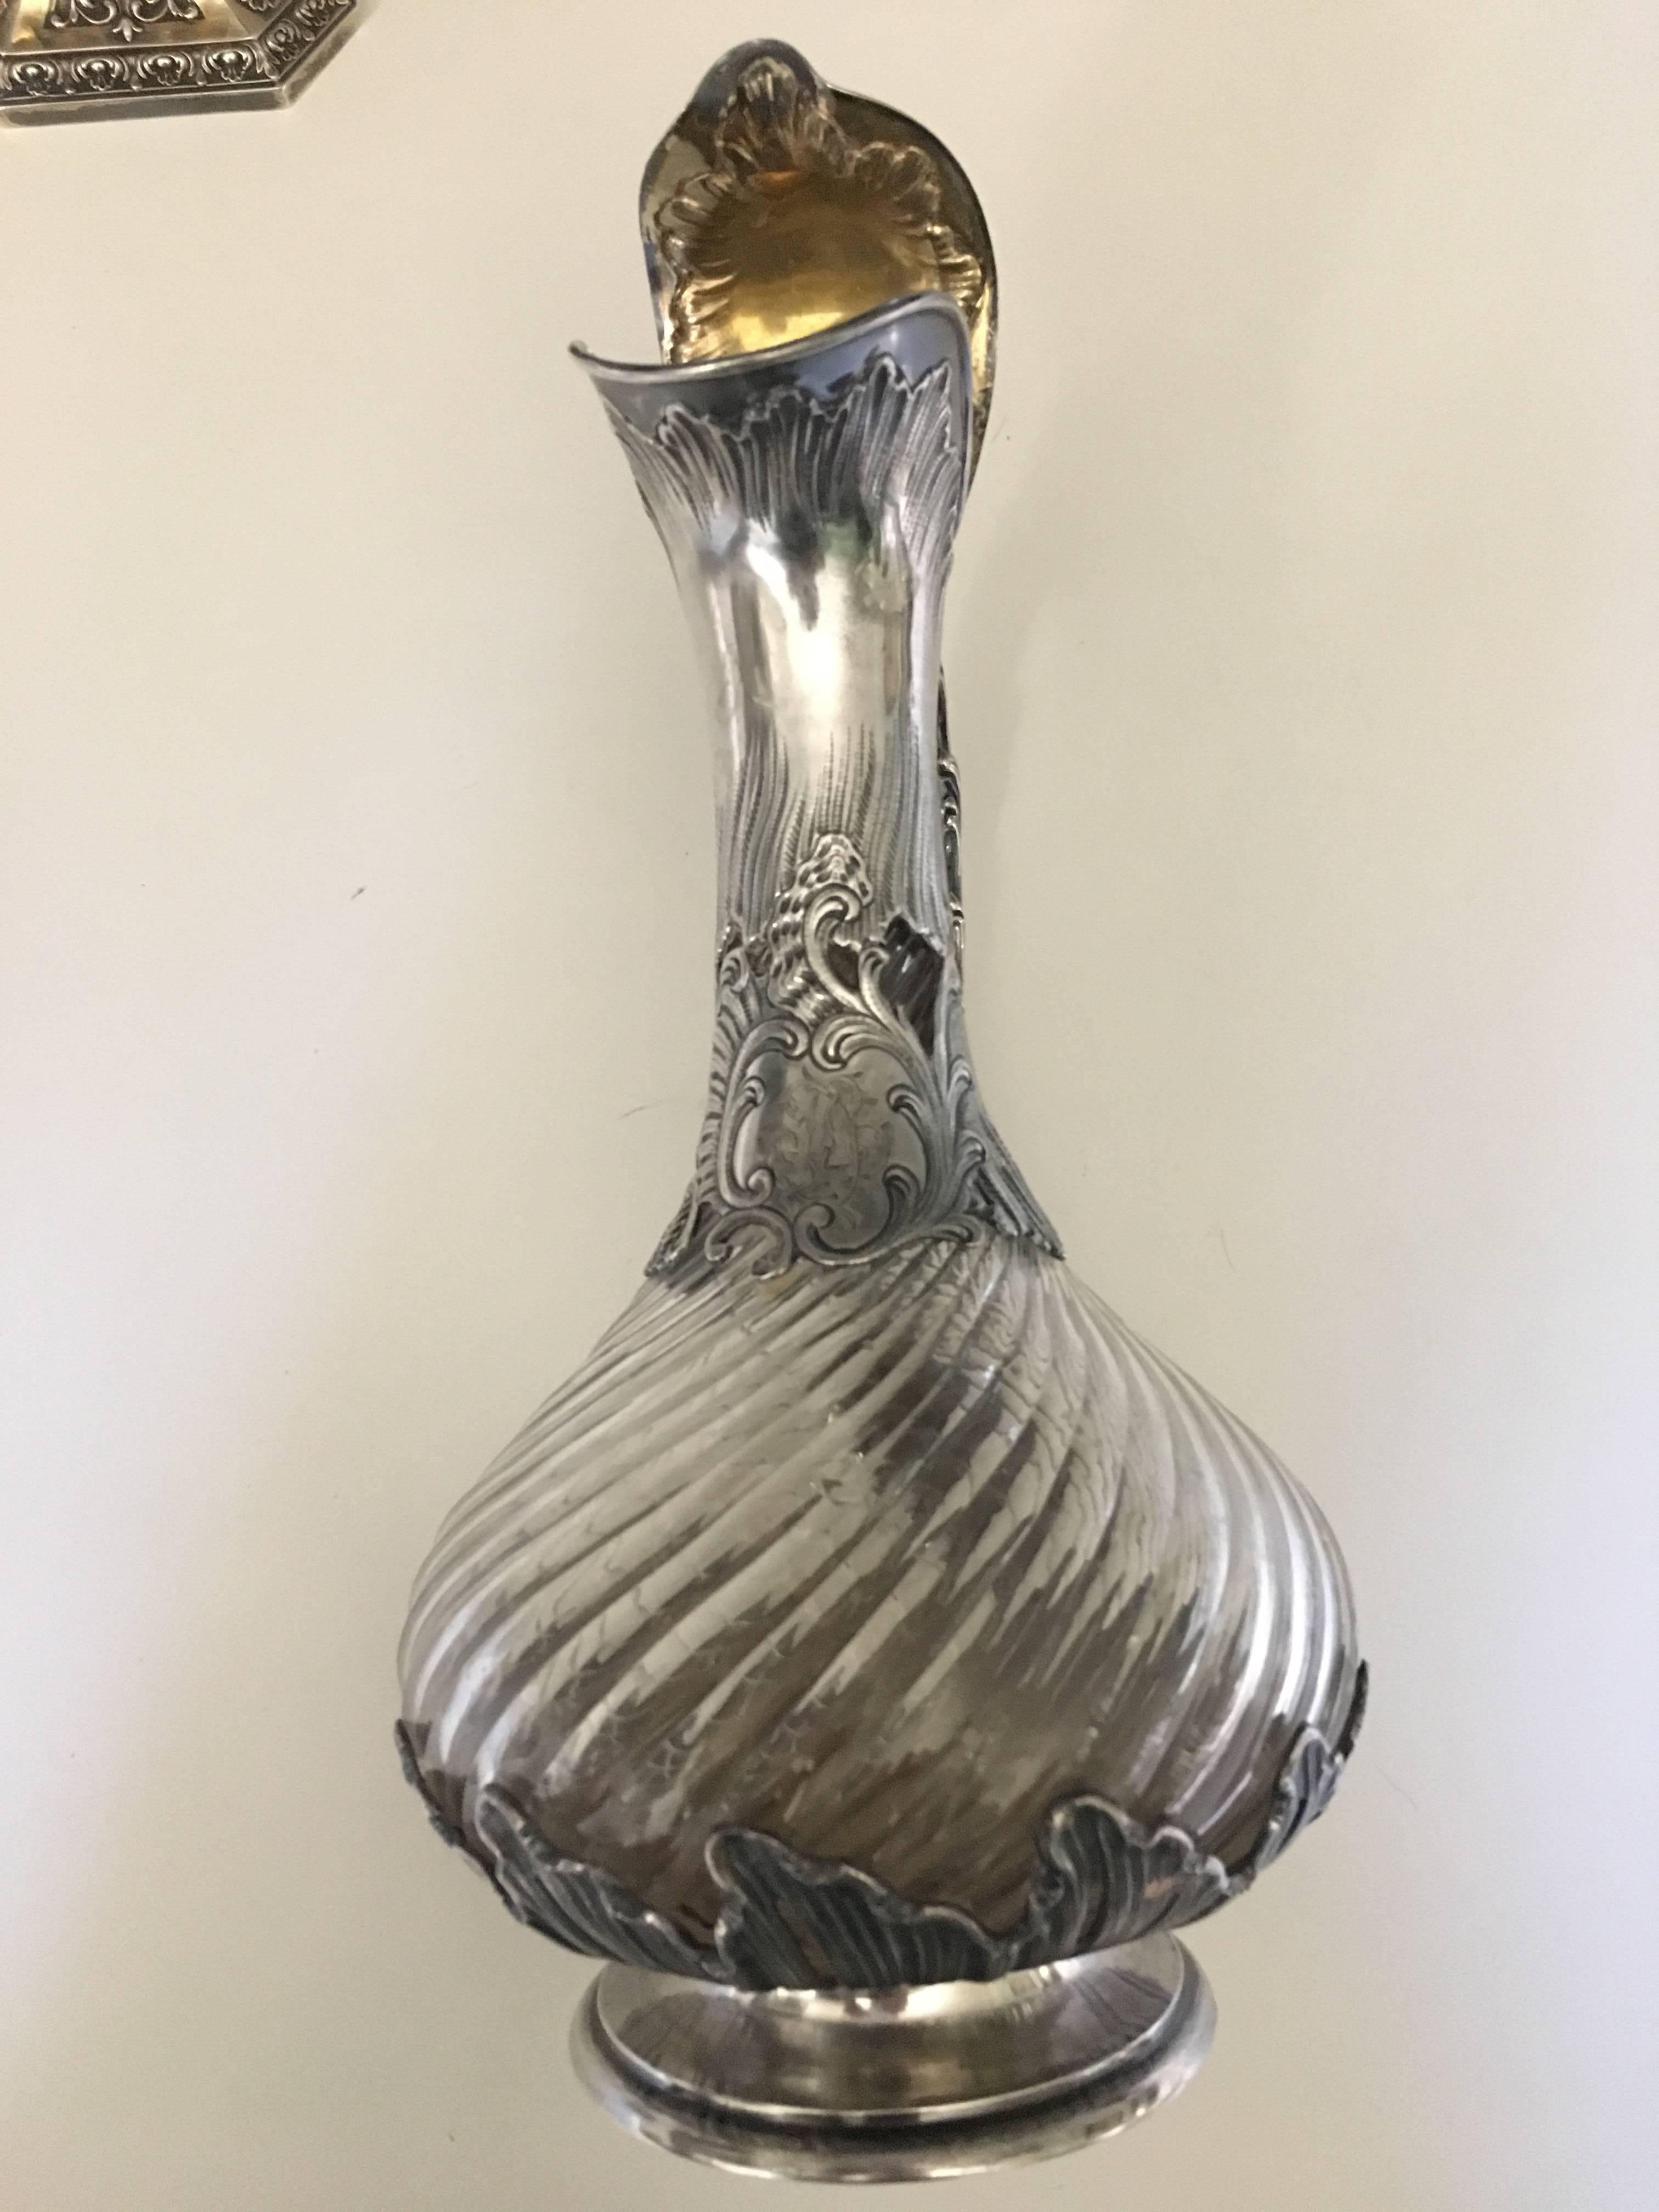 French sterling silver and cut-glass one claret jug.

Rococo styling spiral cut body.
Aiguiere in crystal with twisted ribs, the silver frame with rich decor of waves and foliage, the neck with cartridge Rocaille, the taking of the lid with